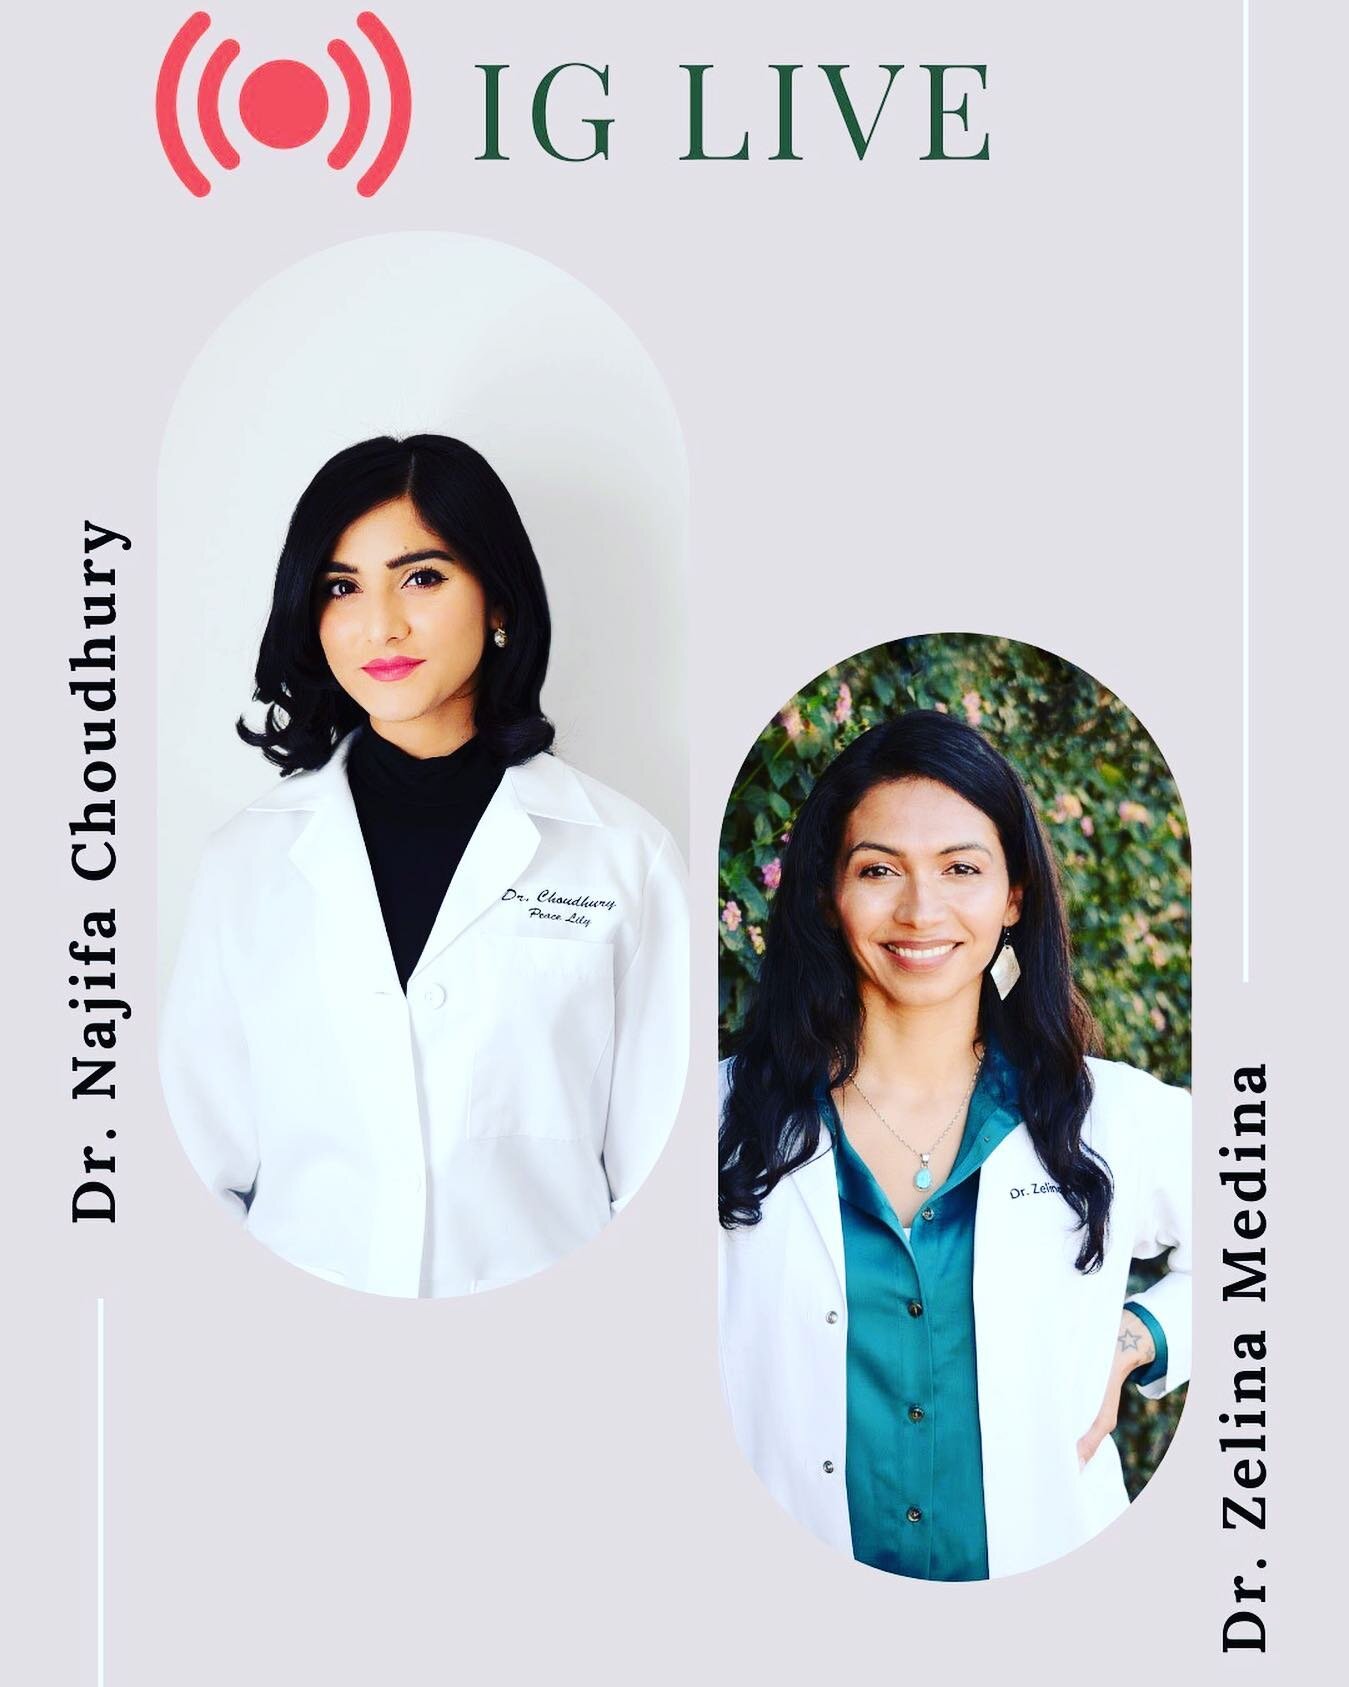 Tune in this coming Friday at 230 PT for an IG live interview with @dr.peacelily !!

We will be talking all things acupuncture, cupping and CBD!

Join us and ask questions as well! 

#Acuvida #DrZelinaMedina #Acupuncture #AcuVidaAcupuncture #CBD #Nat